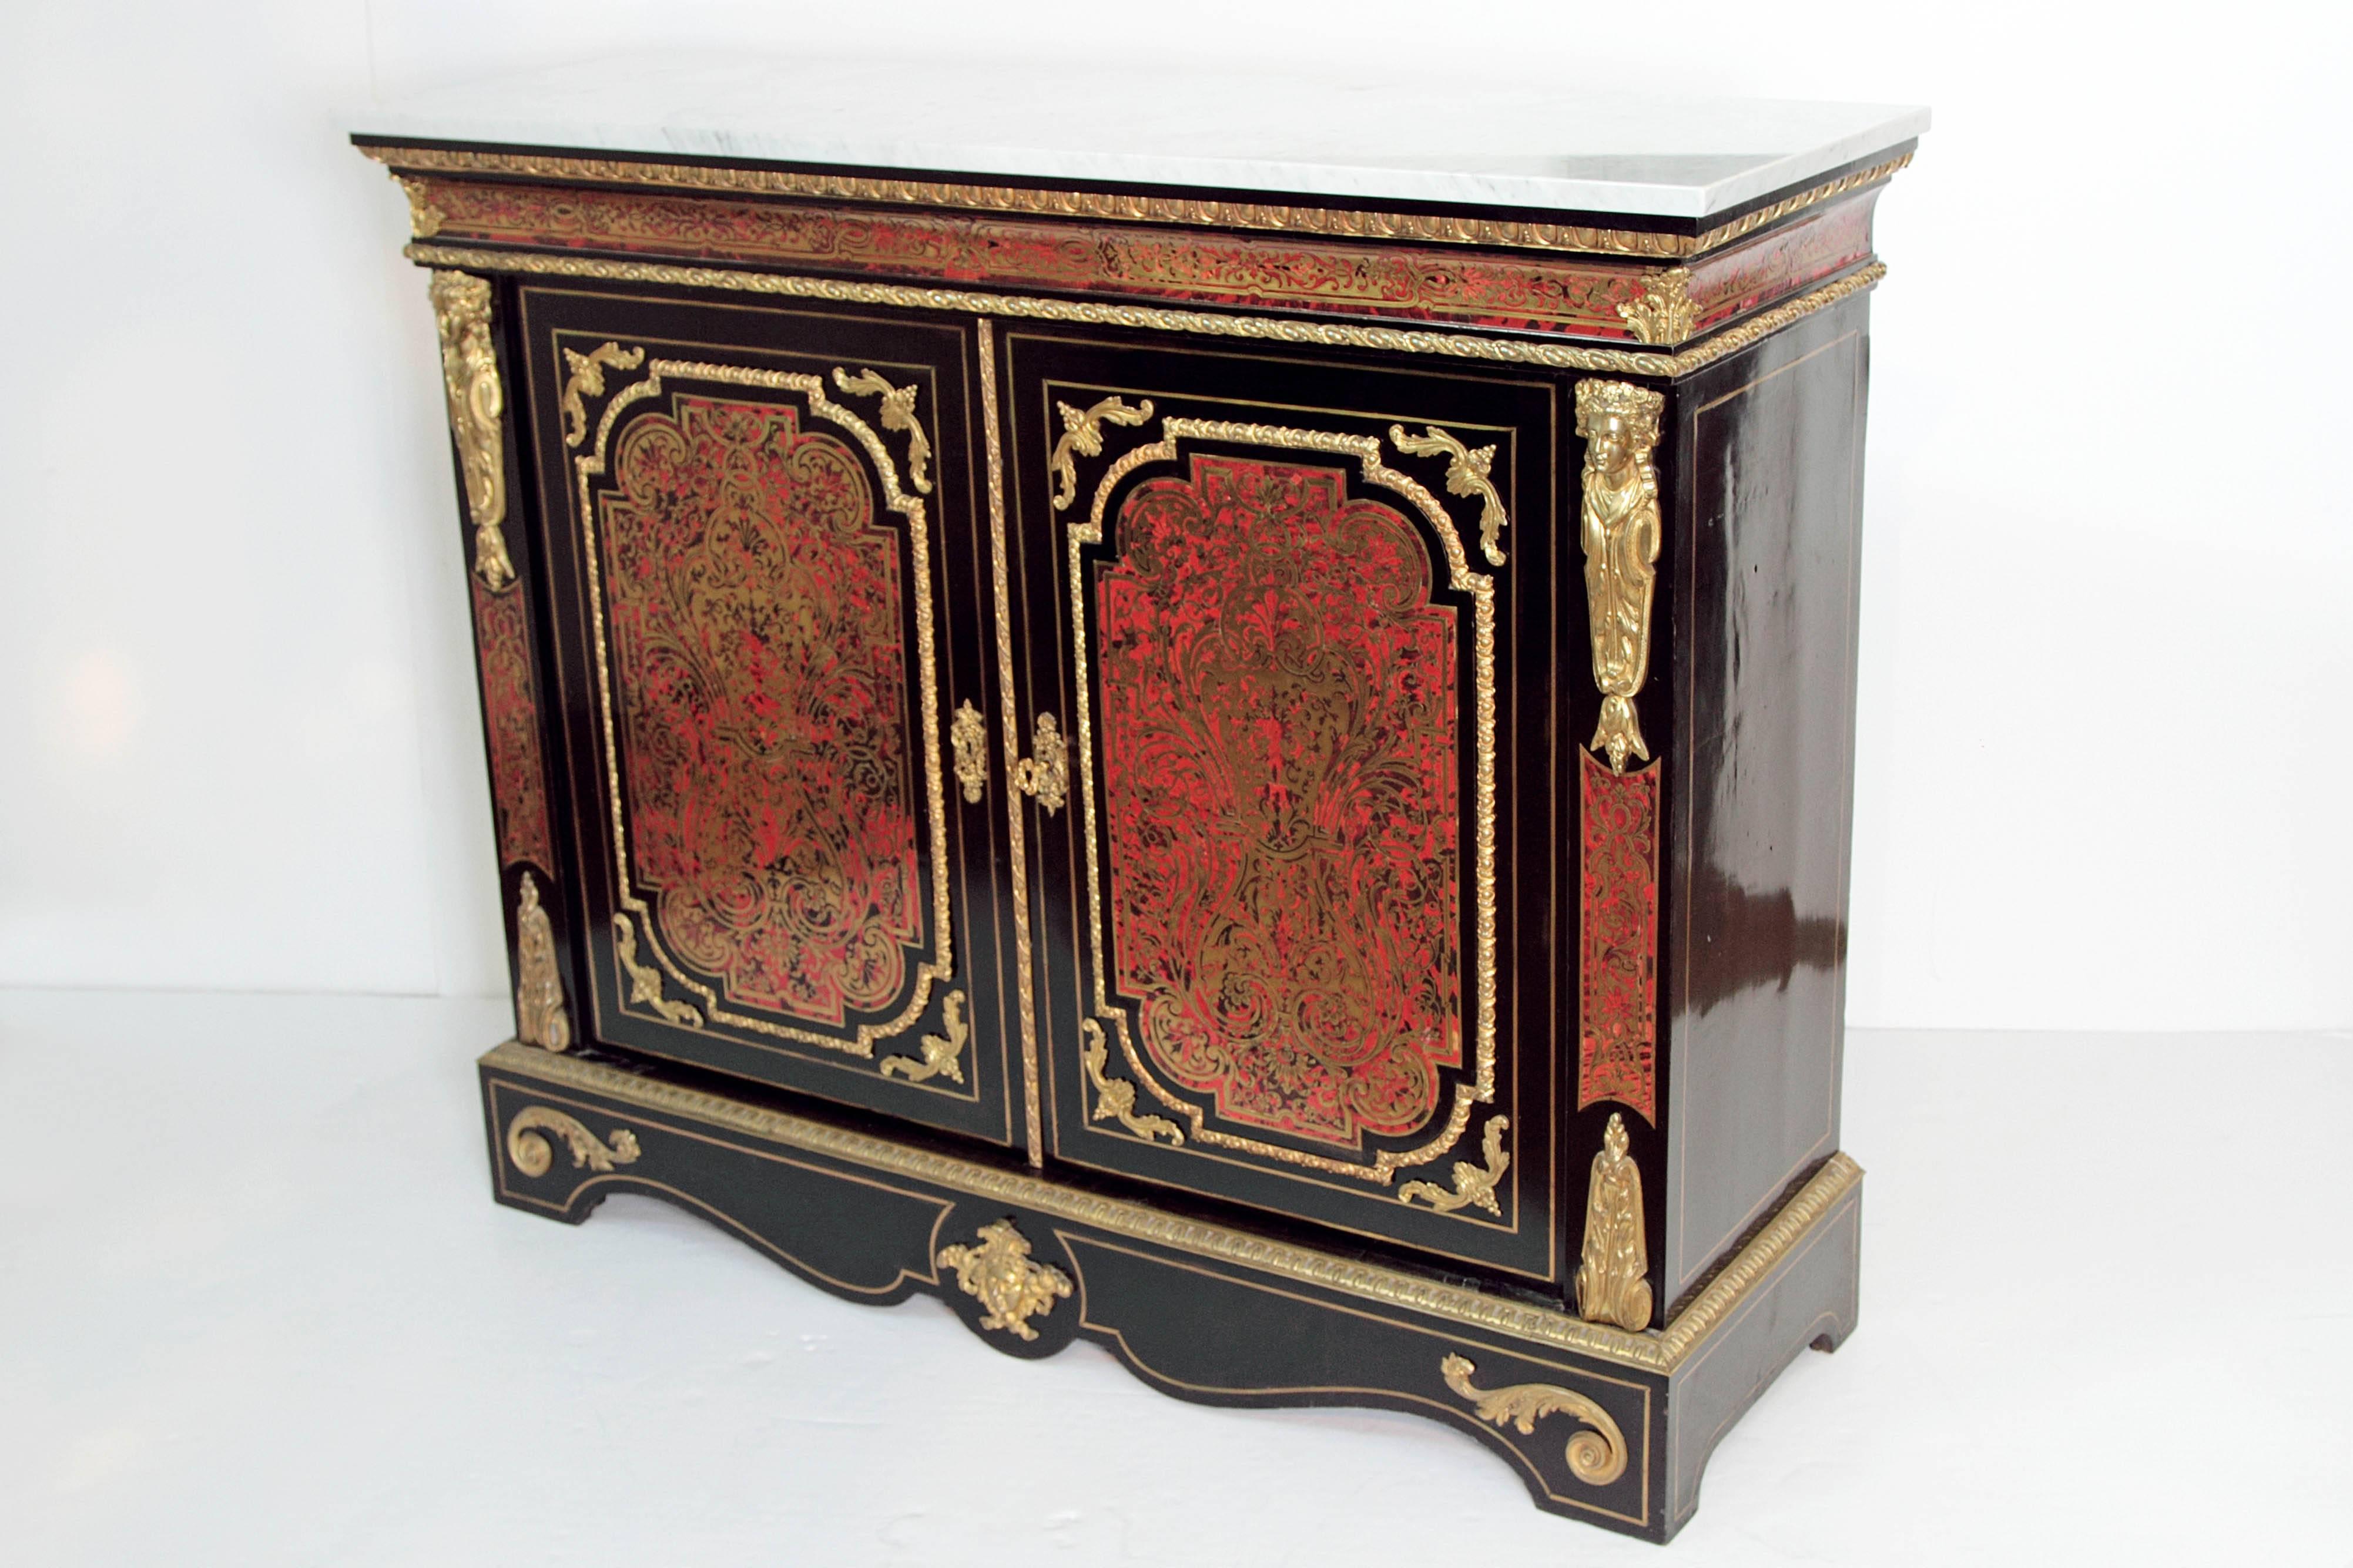 A 19th century French neoclassical / Louis XVI- style cabinet with Boulle work panels in red tortoise and gilded brass on doors, beside doors, and frieze (above doors and each side), the whole having a black body, white marble top, ormolu decoration